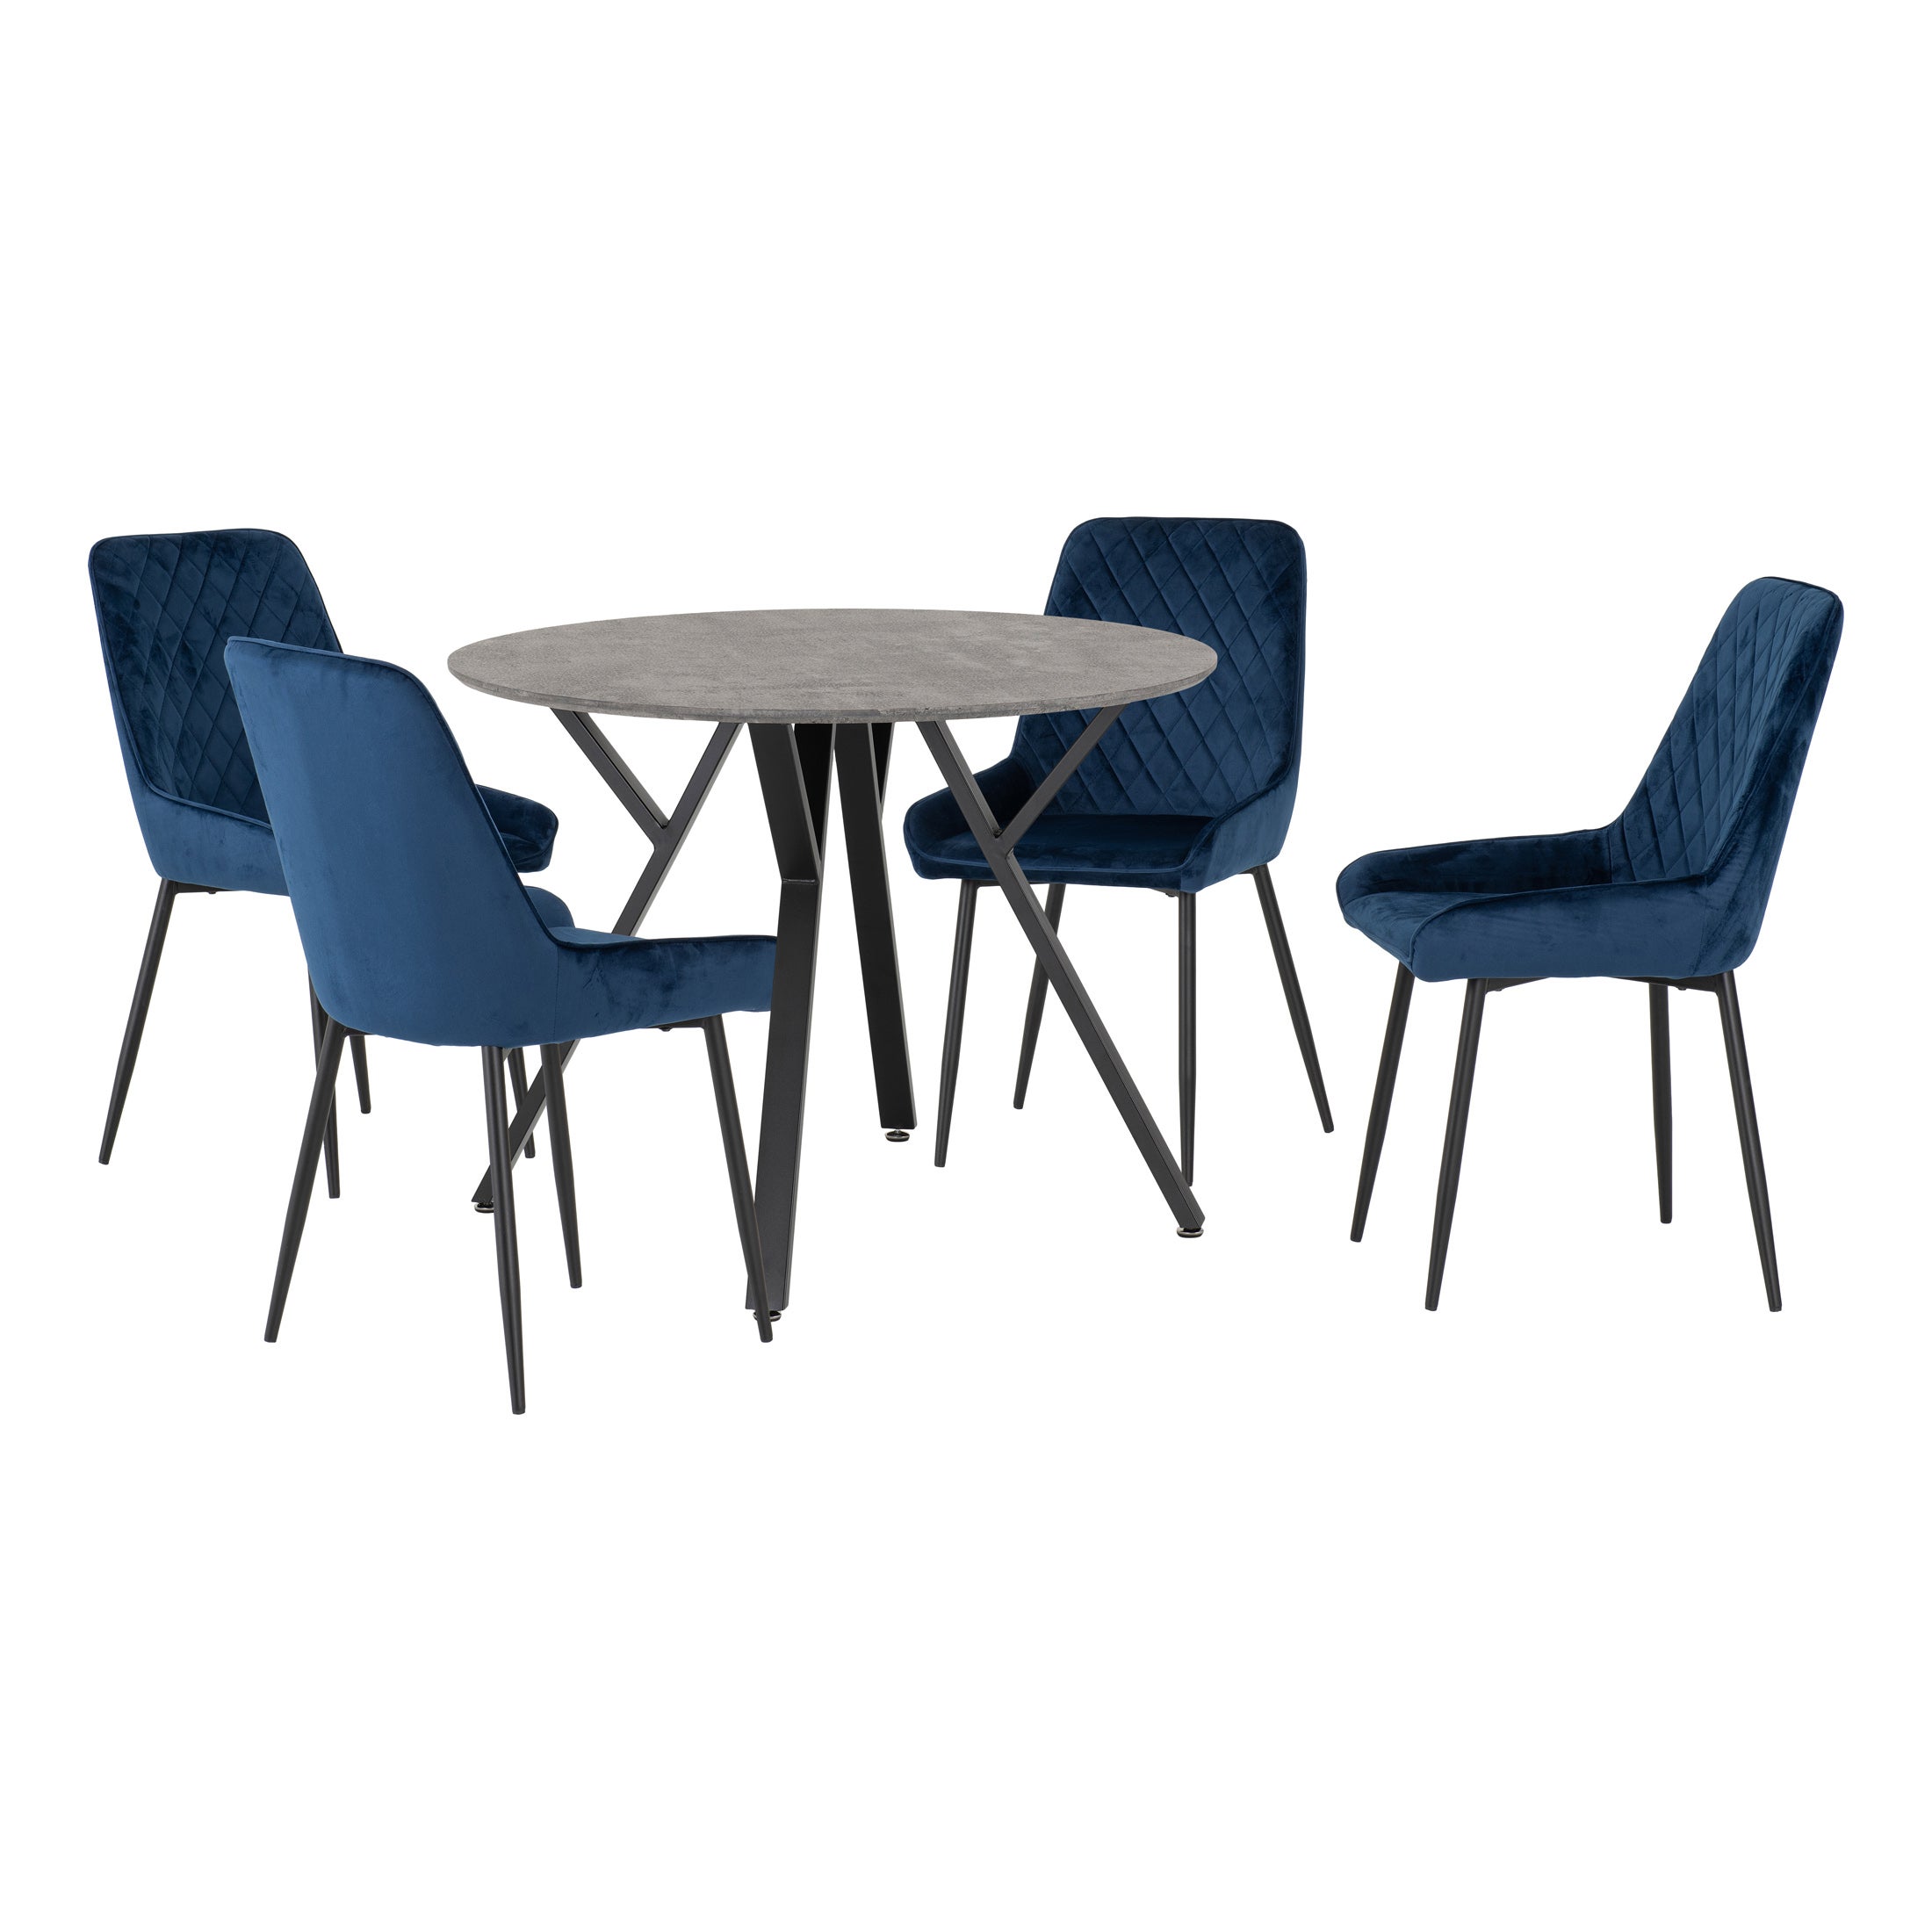 Athens Round Dining Table with 4 Avery Chairs Navy Blue